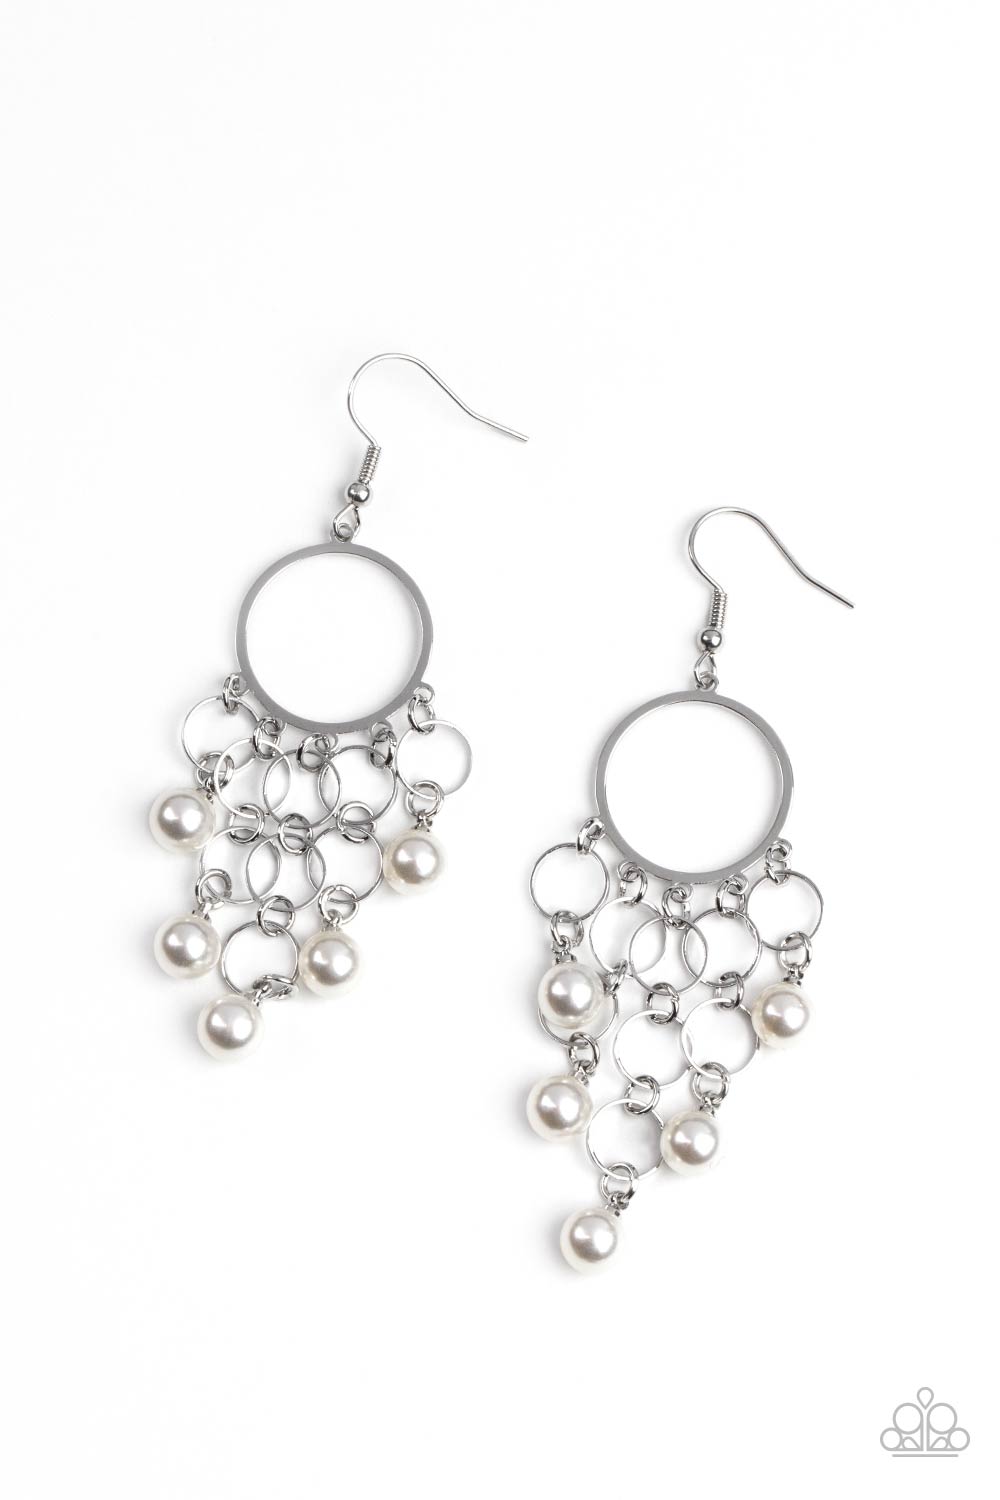 Paparazzi When Life Gives You Pearls - White Earrings - A Finishing Touch Jewelry